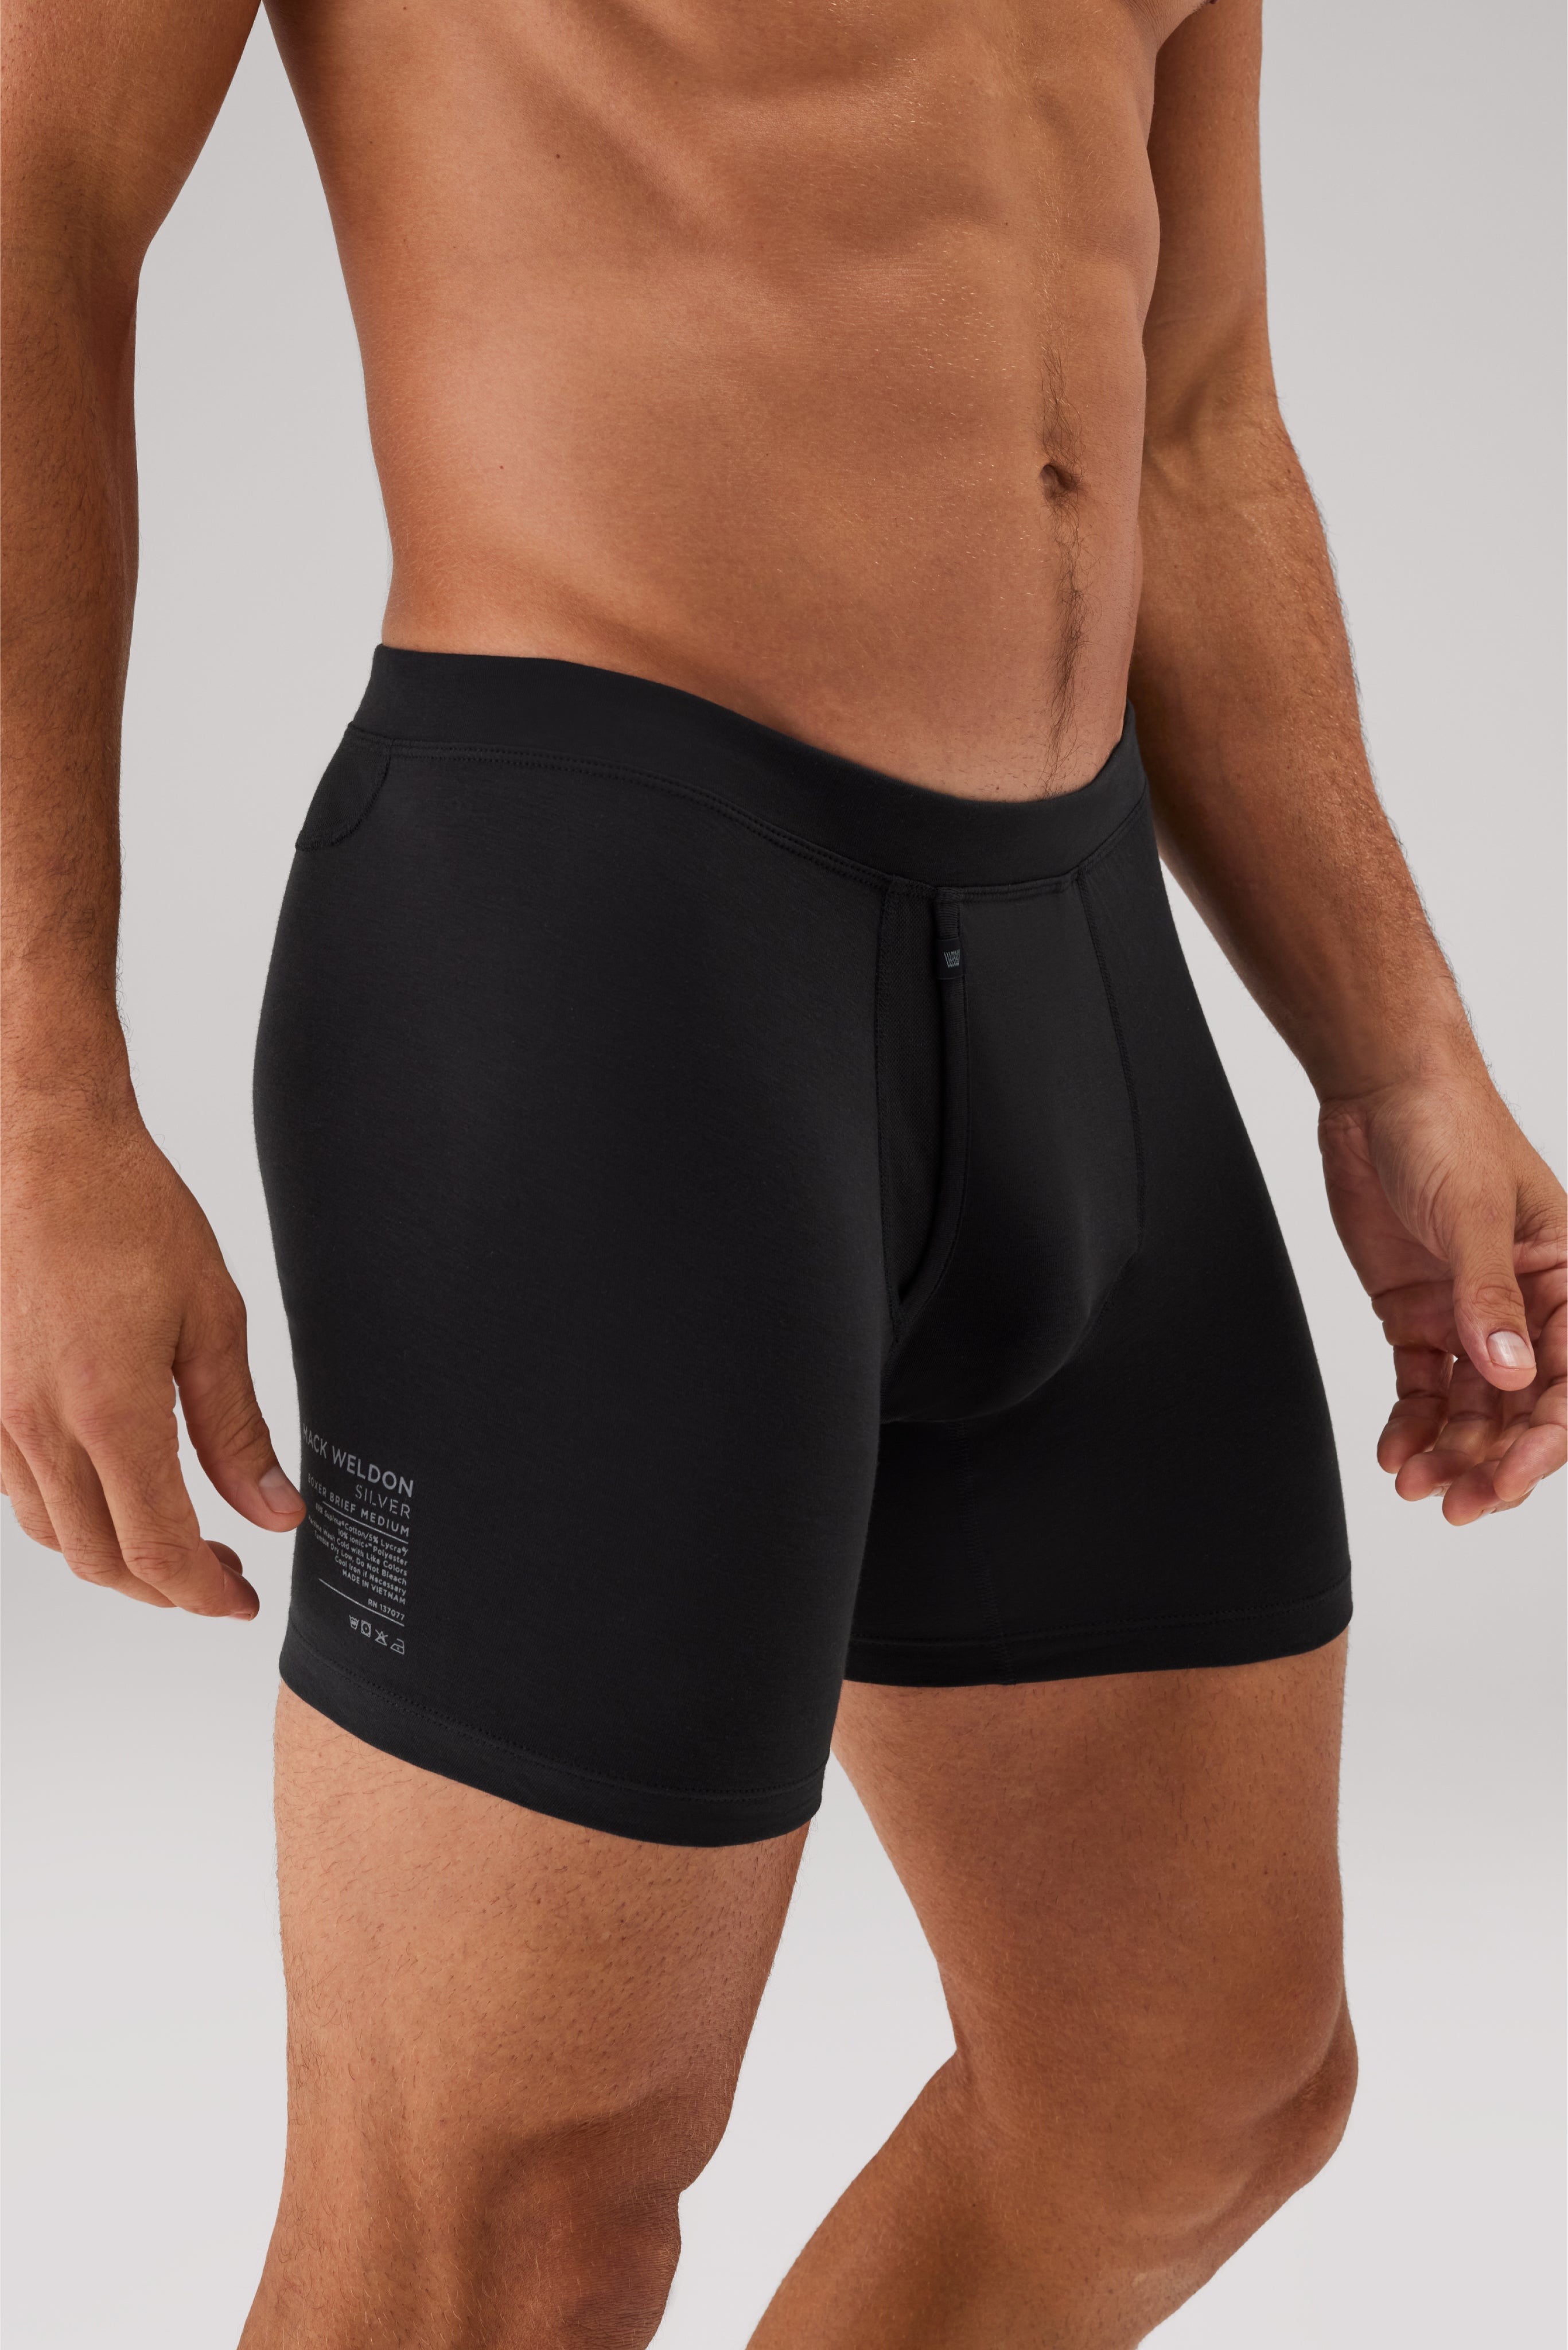 Mack Weldon review: Is the high-end men's boxer brief worth it? - Reviewed